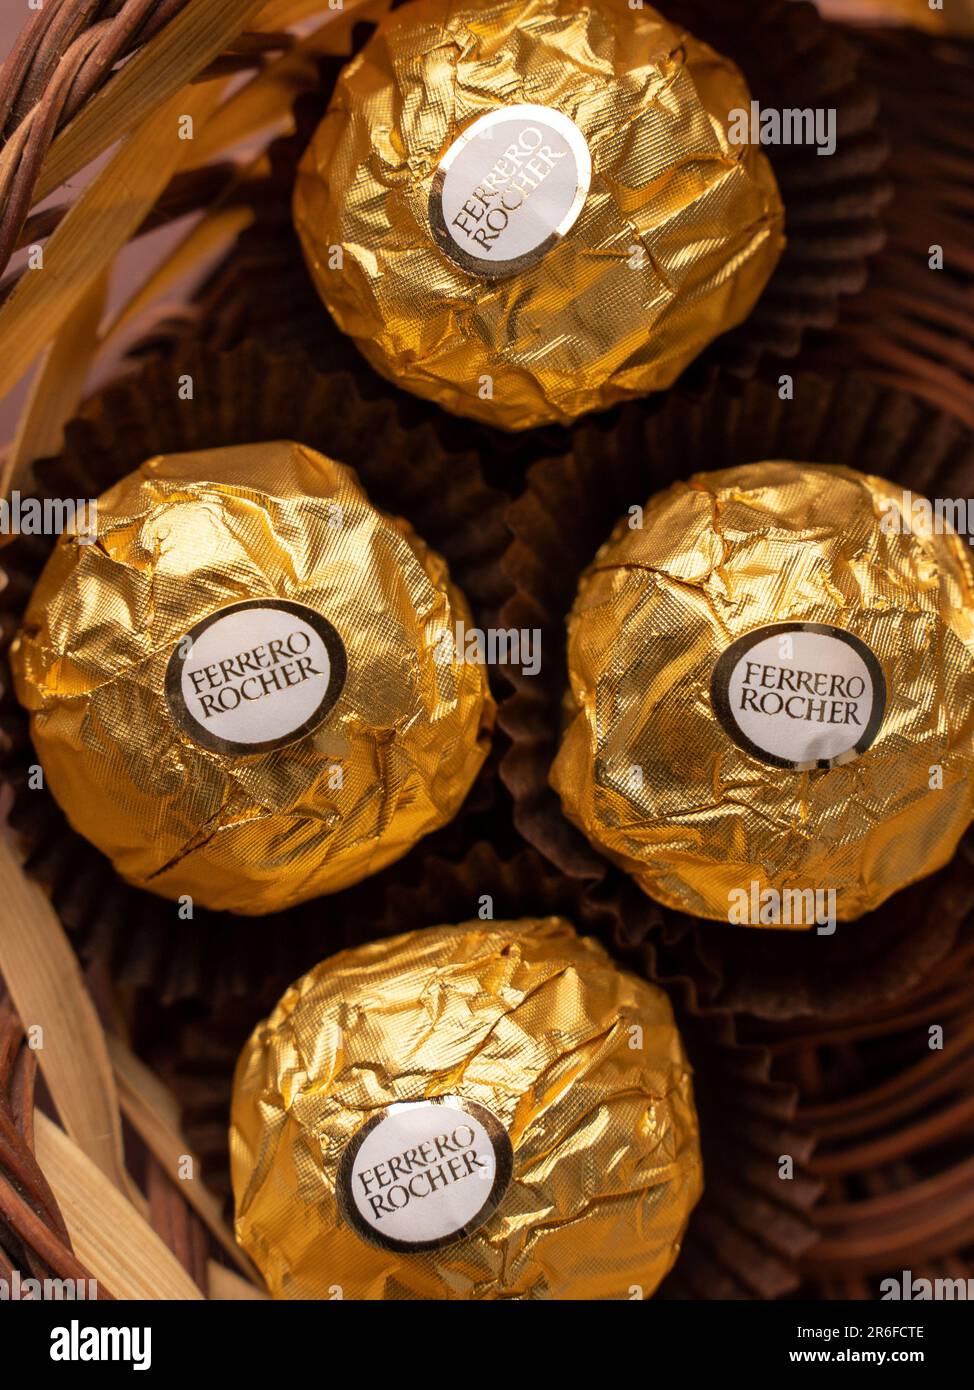 Box of ferrero rocher hi-res stock photography and images - Alamy